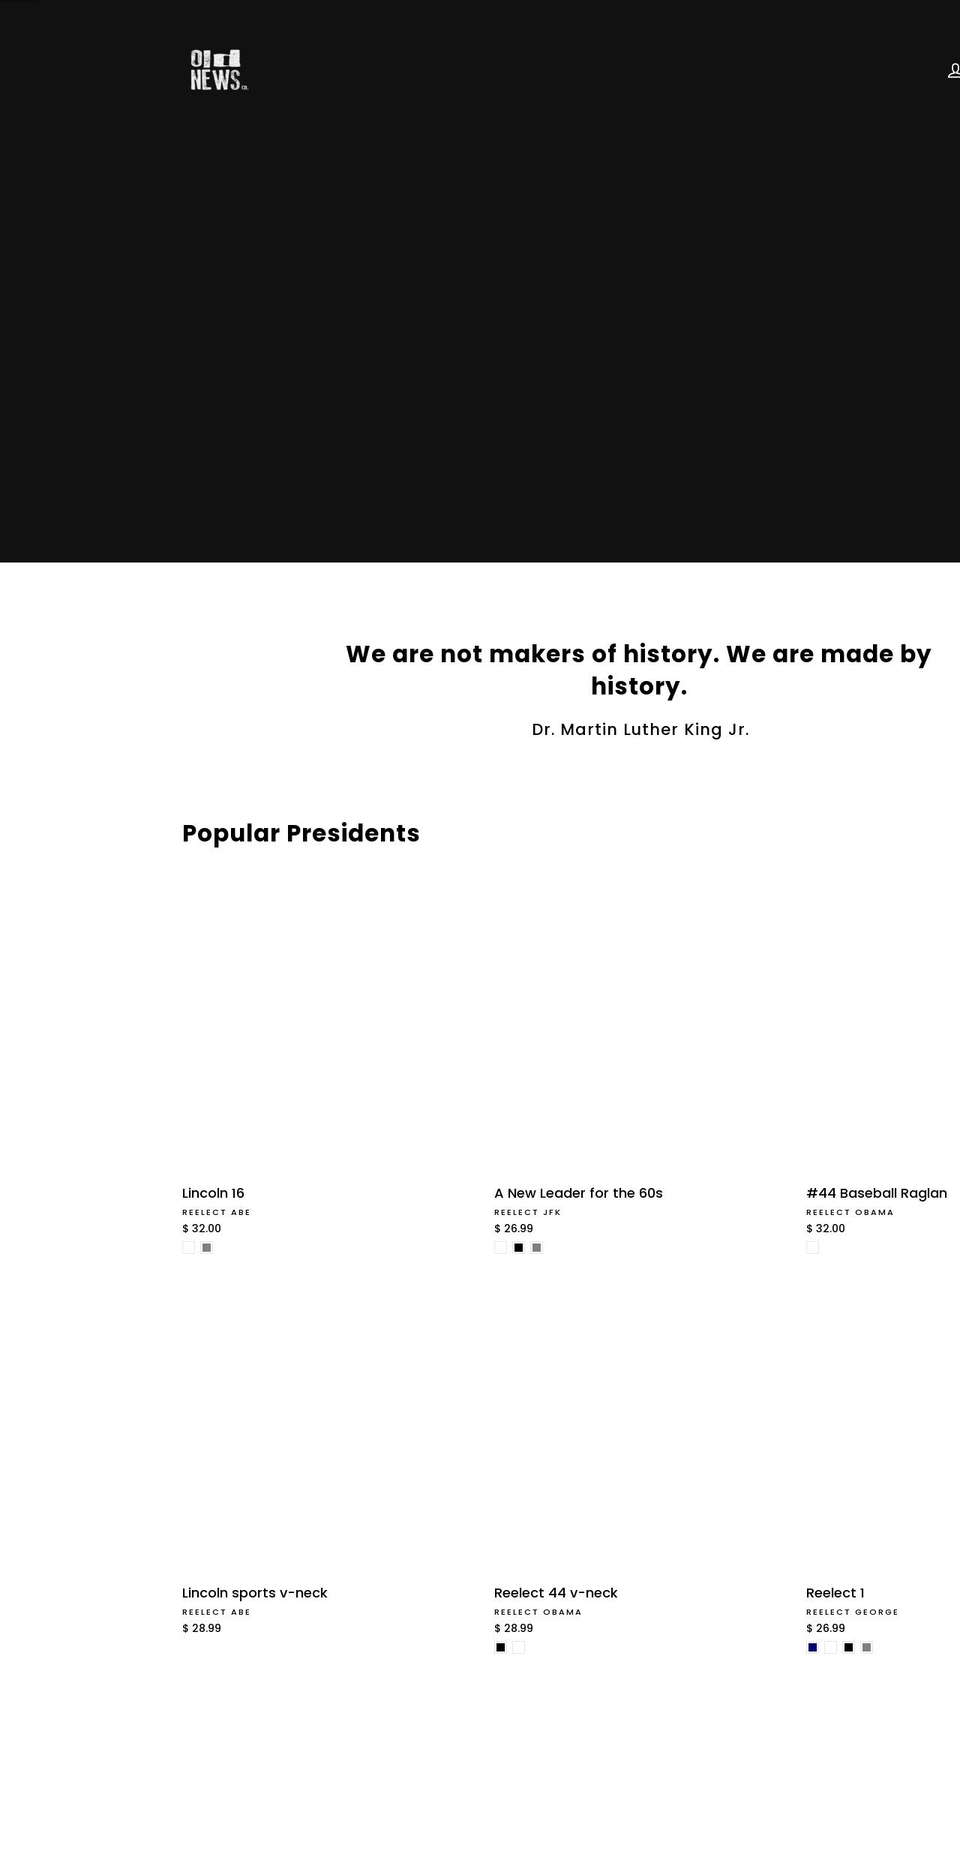 Updated Motion Shopify theme site example reelectthepresidents.com